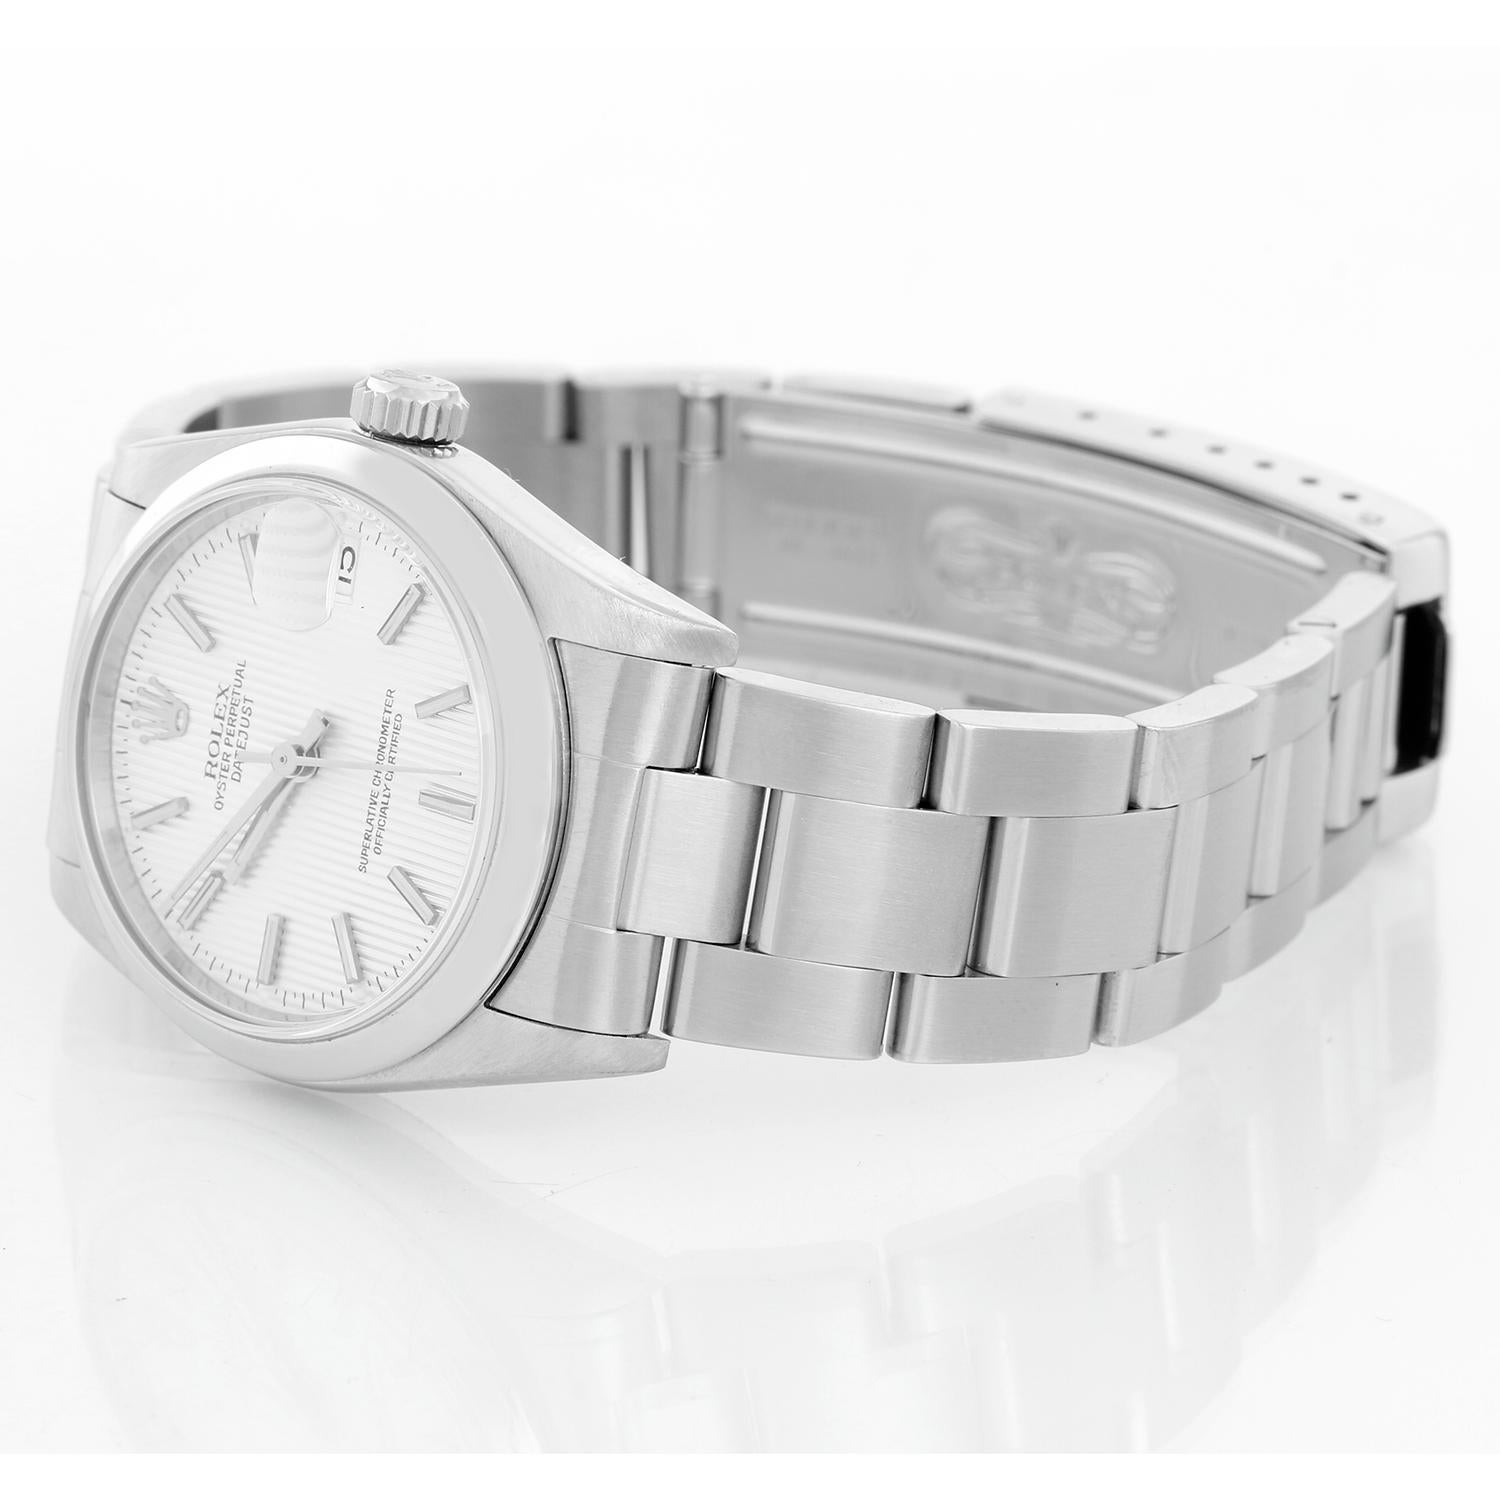 Rolex Stainless Steel Datejust Midsize Watch 78240 - Automatic winding. Stainless steel case (31mm) with smooth bezel. Silver tapestry dial . Stainless steel Oyster bracelet. Pre-owned with custom box .